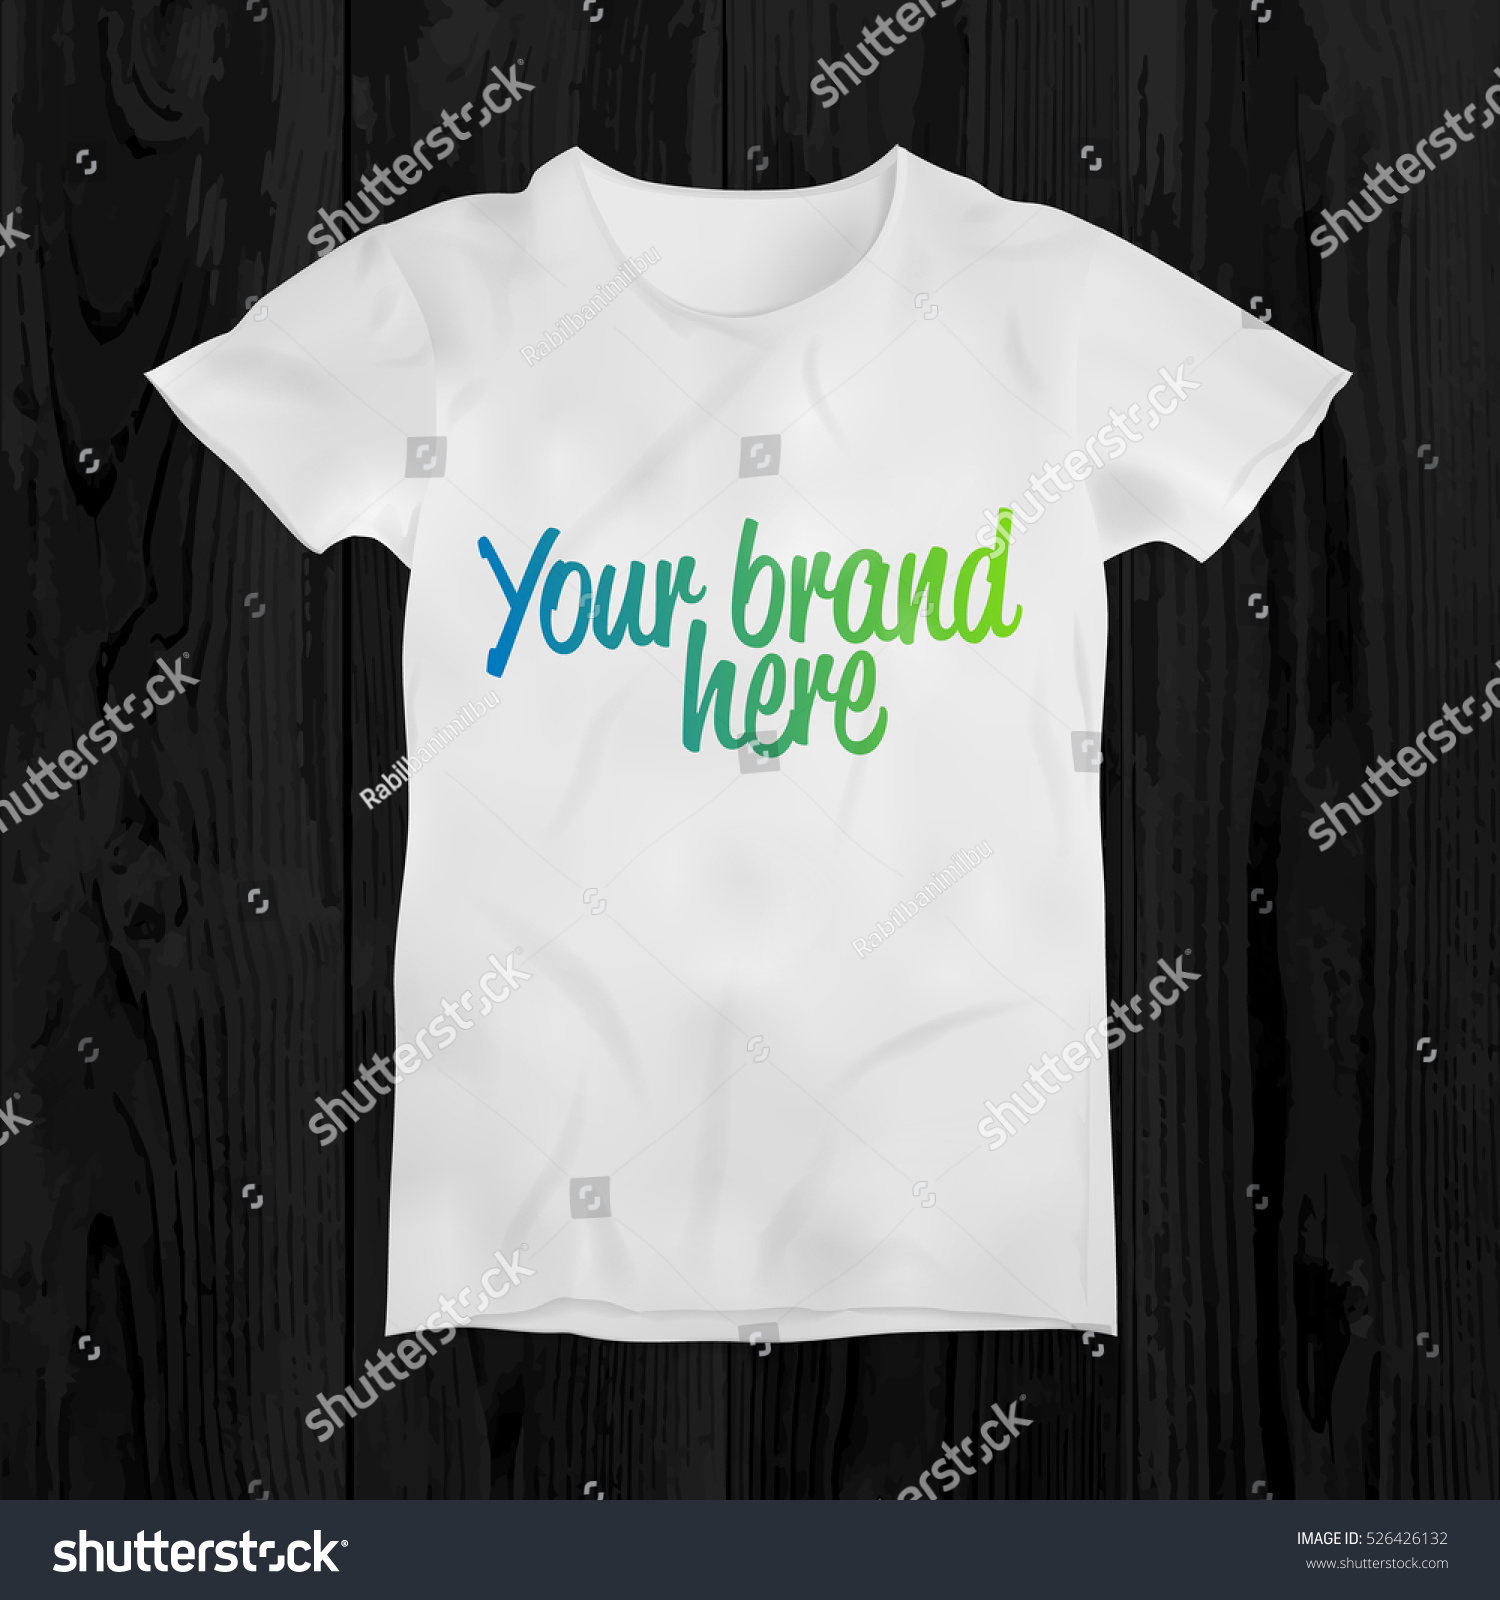 Download Vector Illustration Blank Tshirt Template Stock Vector Royalty Free 526426132